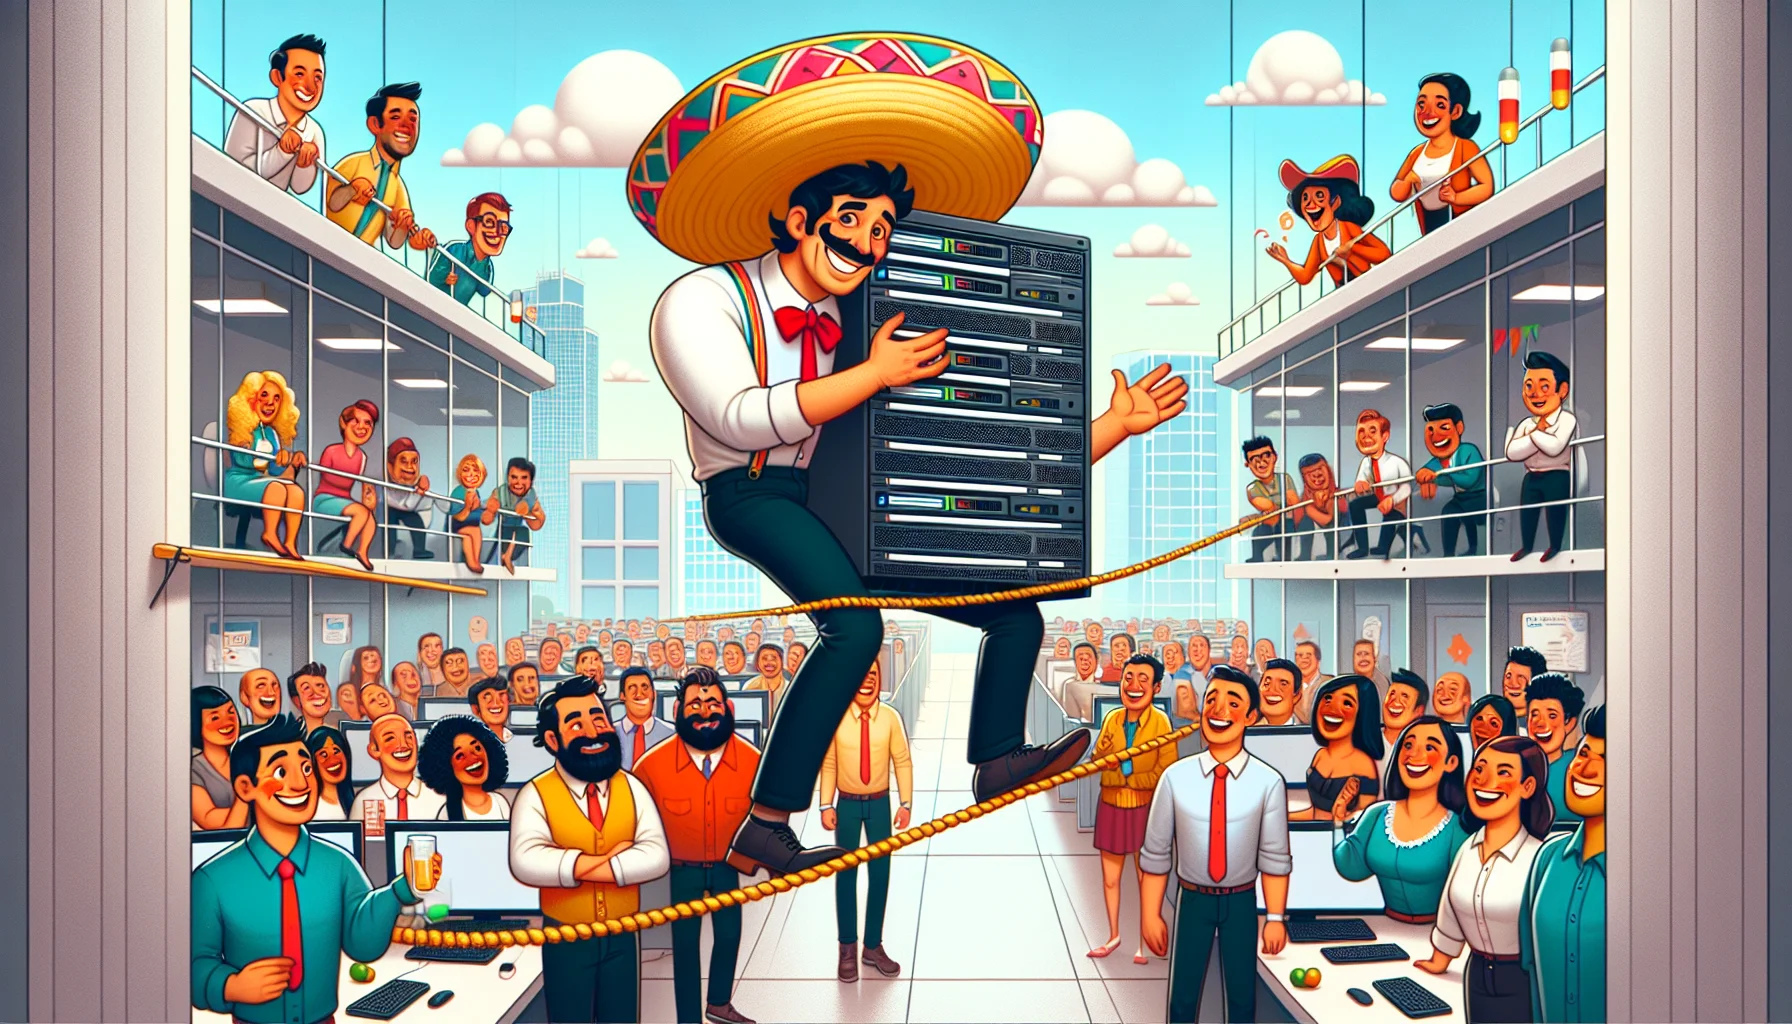 Design a humorous image showcasing a fictitious web hosting company in Mexico called 'GoodPapi'. This scene takes place in a vibrant office environment full of lively employees. A central character should be an affable man, Hispanic, with a bewitching charm and infectious laughter, holding an oversized server while balancing on a tightrope that's stretched across the office. His colleagues, a mixed group of men and women from various descents such as Caucasian, Black, South Asian, and Middle-Eastern, are cheering him on. Everyone in the office should be characterized by warm expressions and colorful clothing. The company logo, a playful rendition of a Mexican sombrero that forms a cloud, can be seen on a banner in the background.